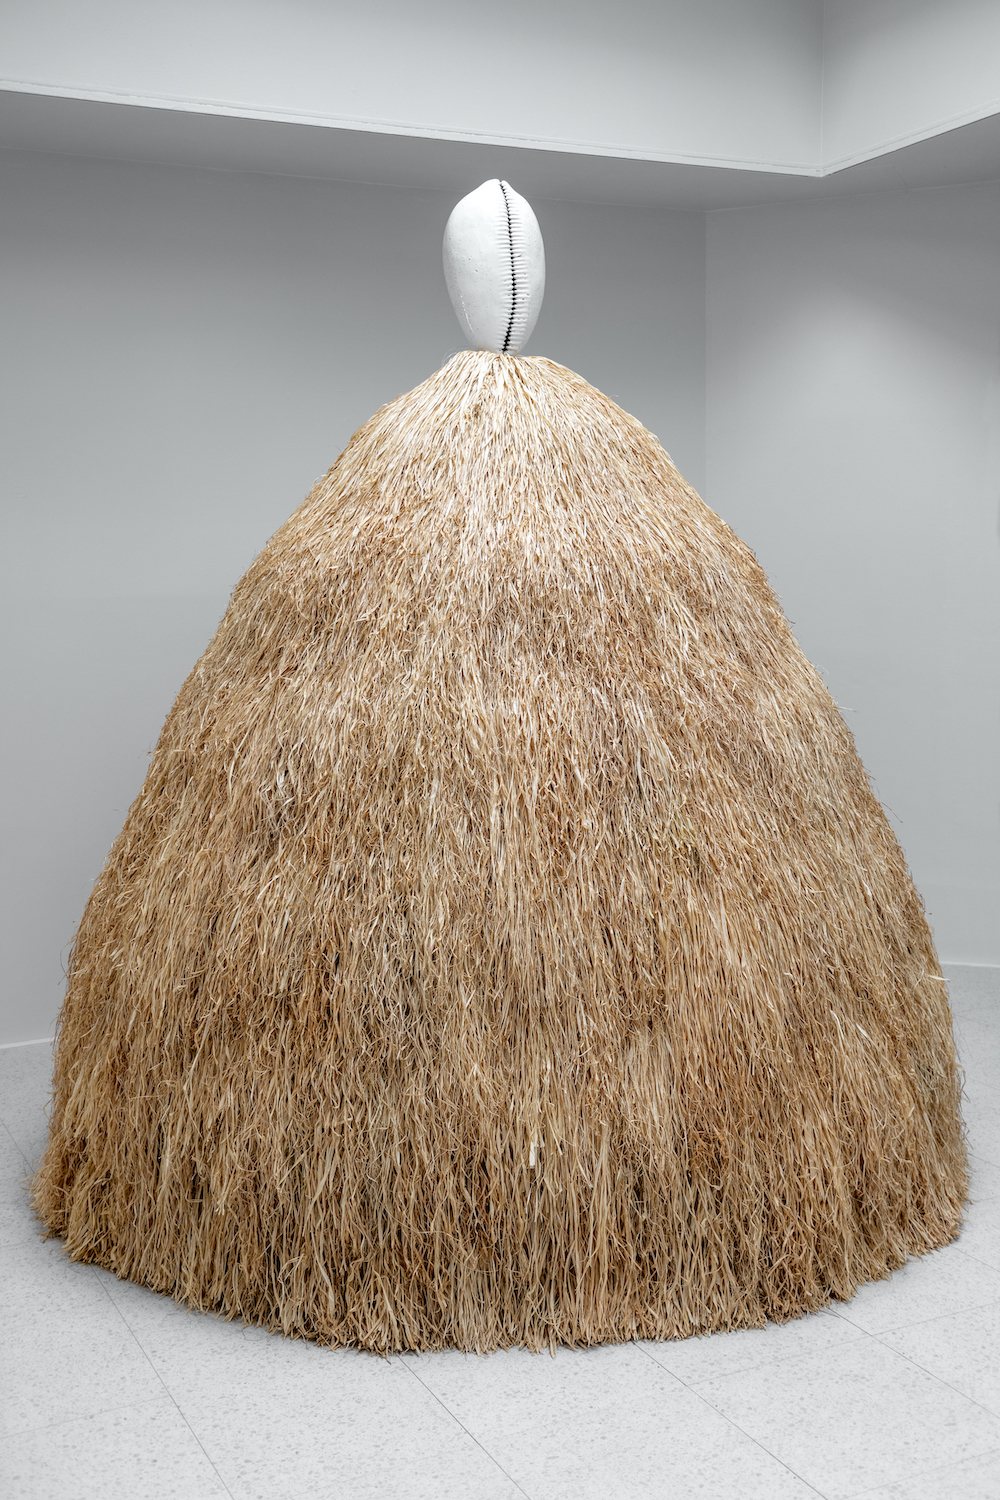 A large sculpture of straw colored raffia resembling a skirt leads up to a stoneware piece of ceramic resembling a shell amidst a stark white room.